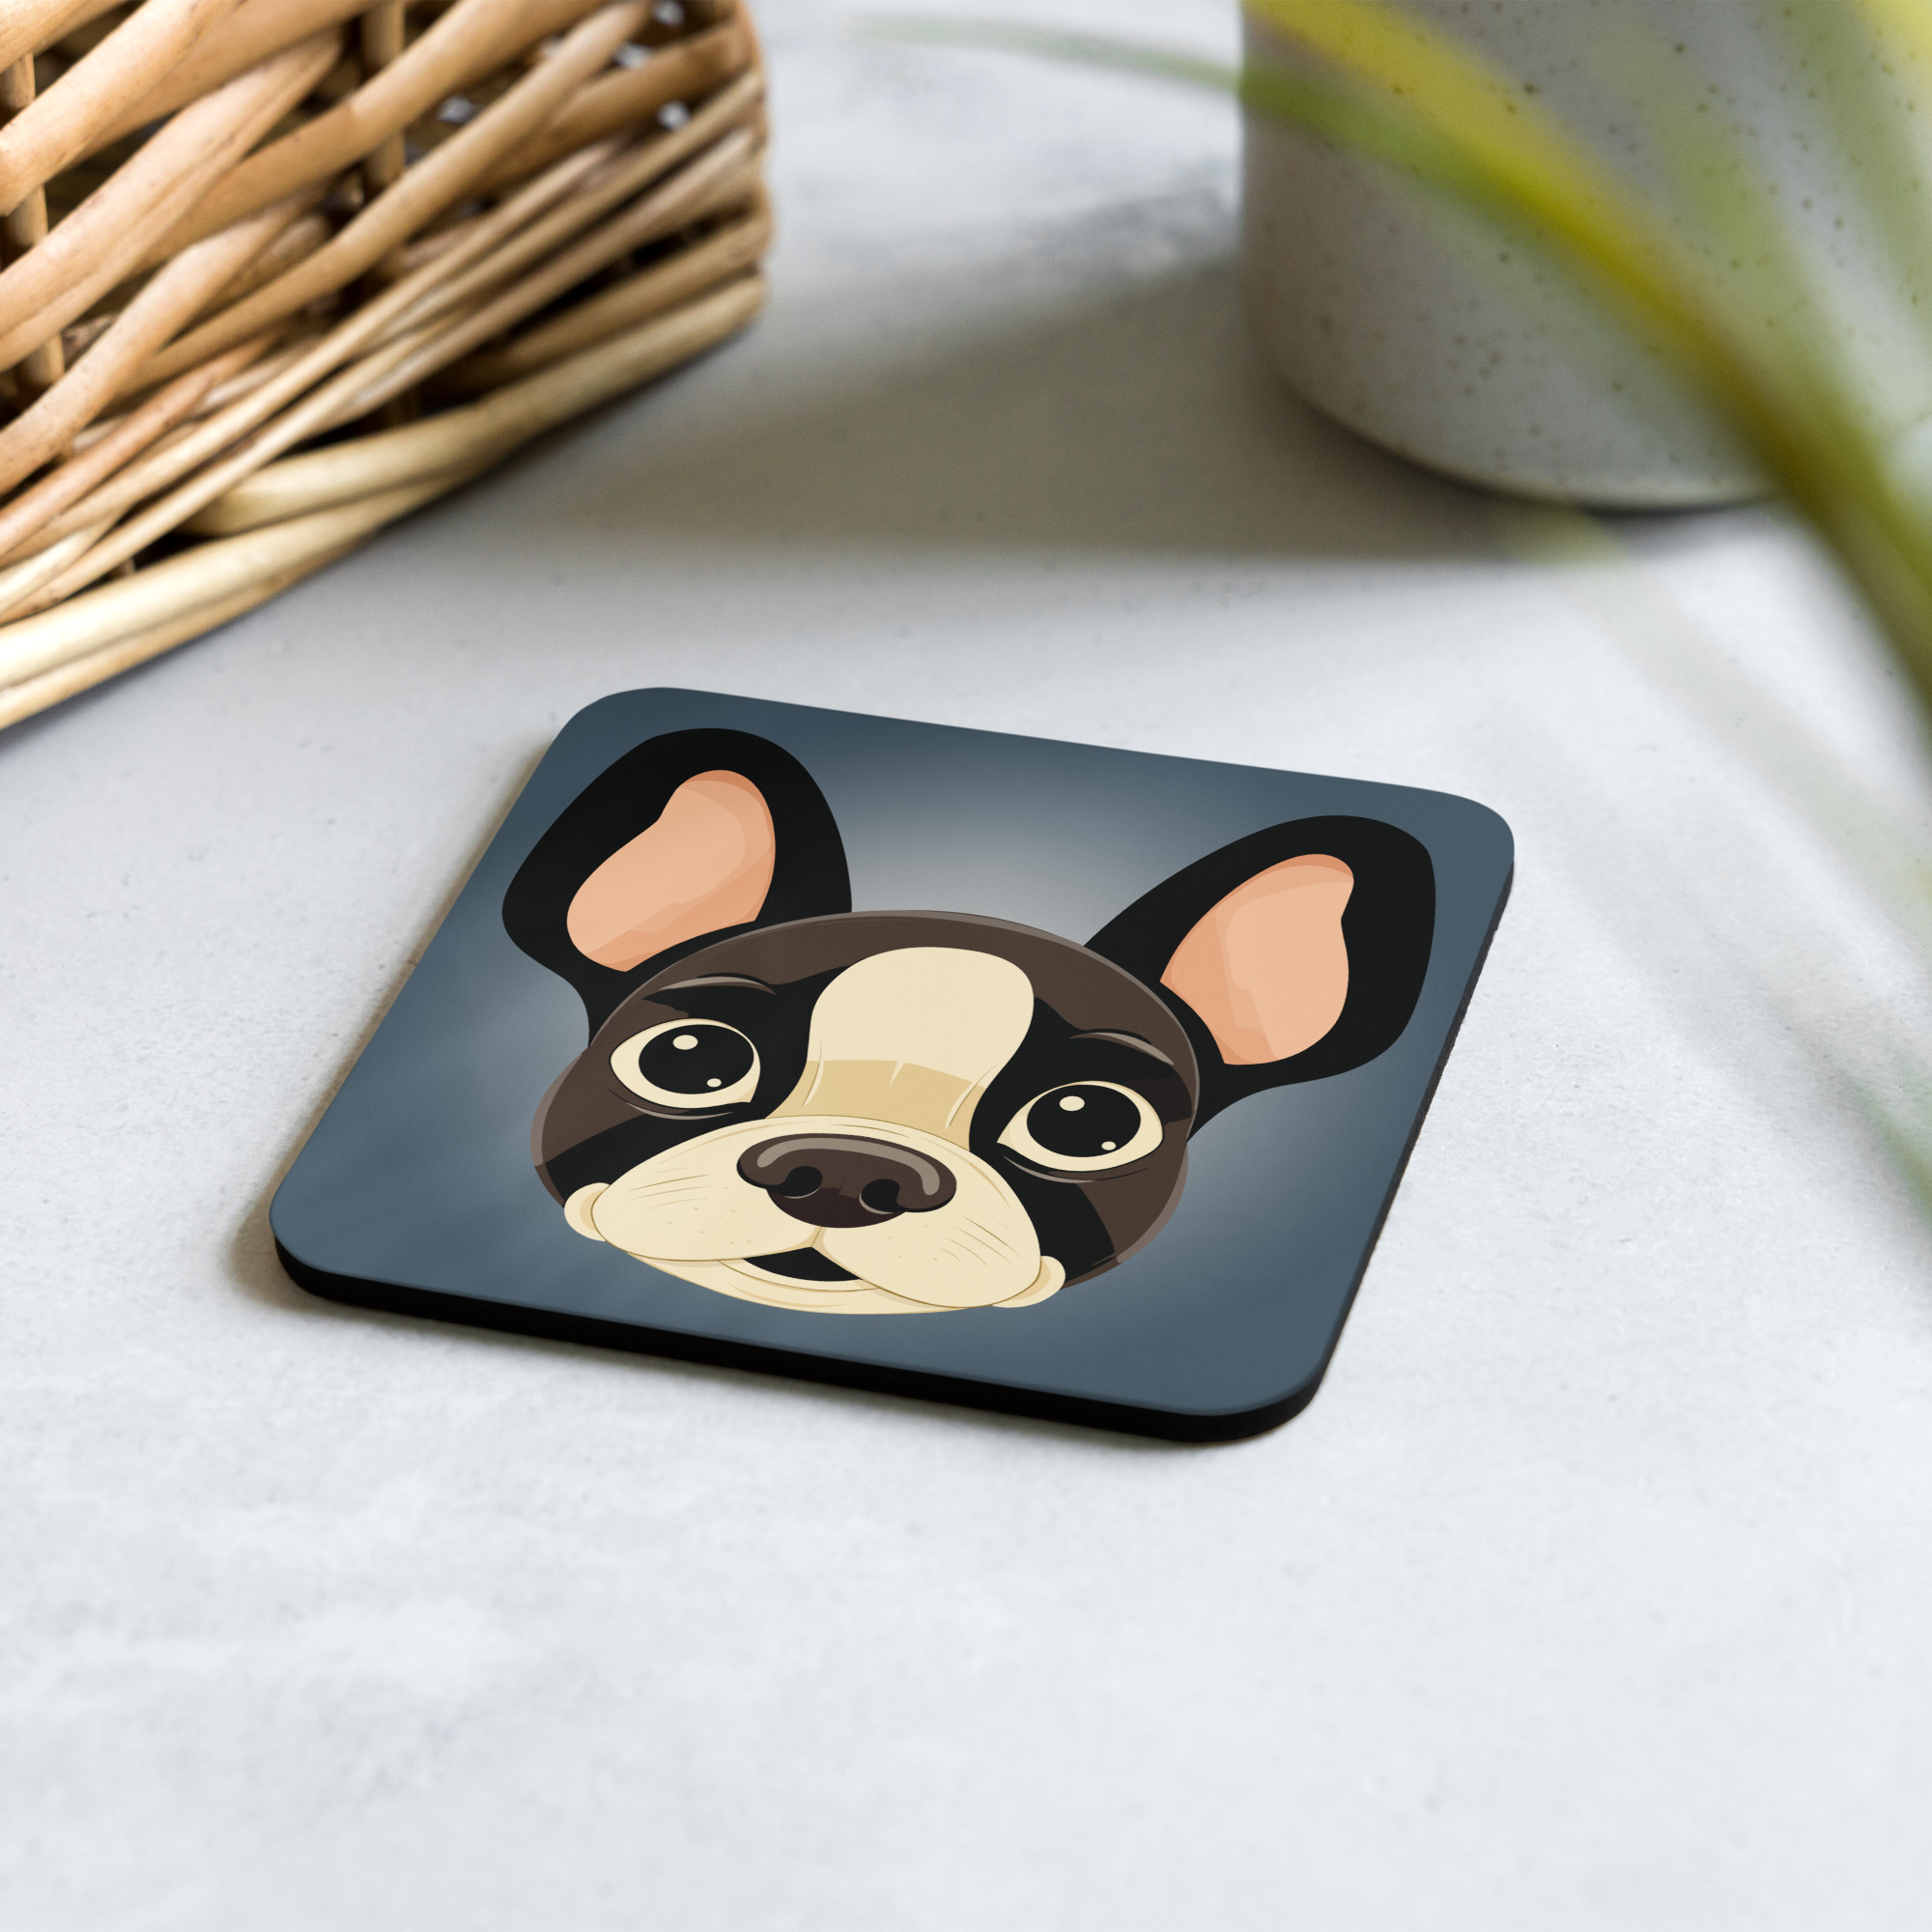 Blue-Gray Retro Boston Terrier Cork-back Coaster on Wooden Table with Food